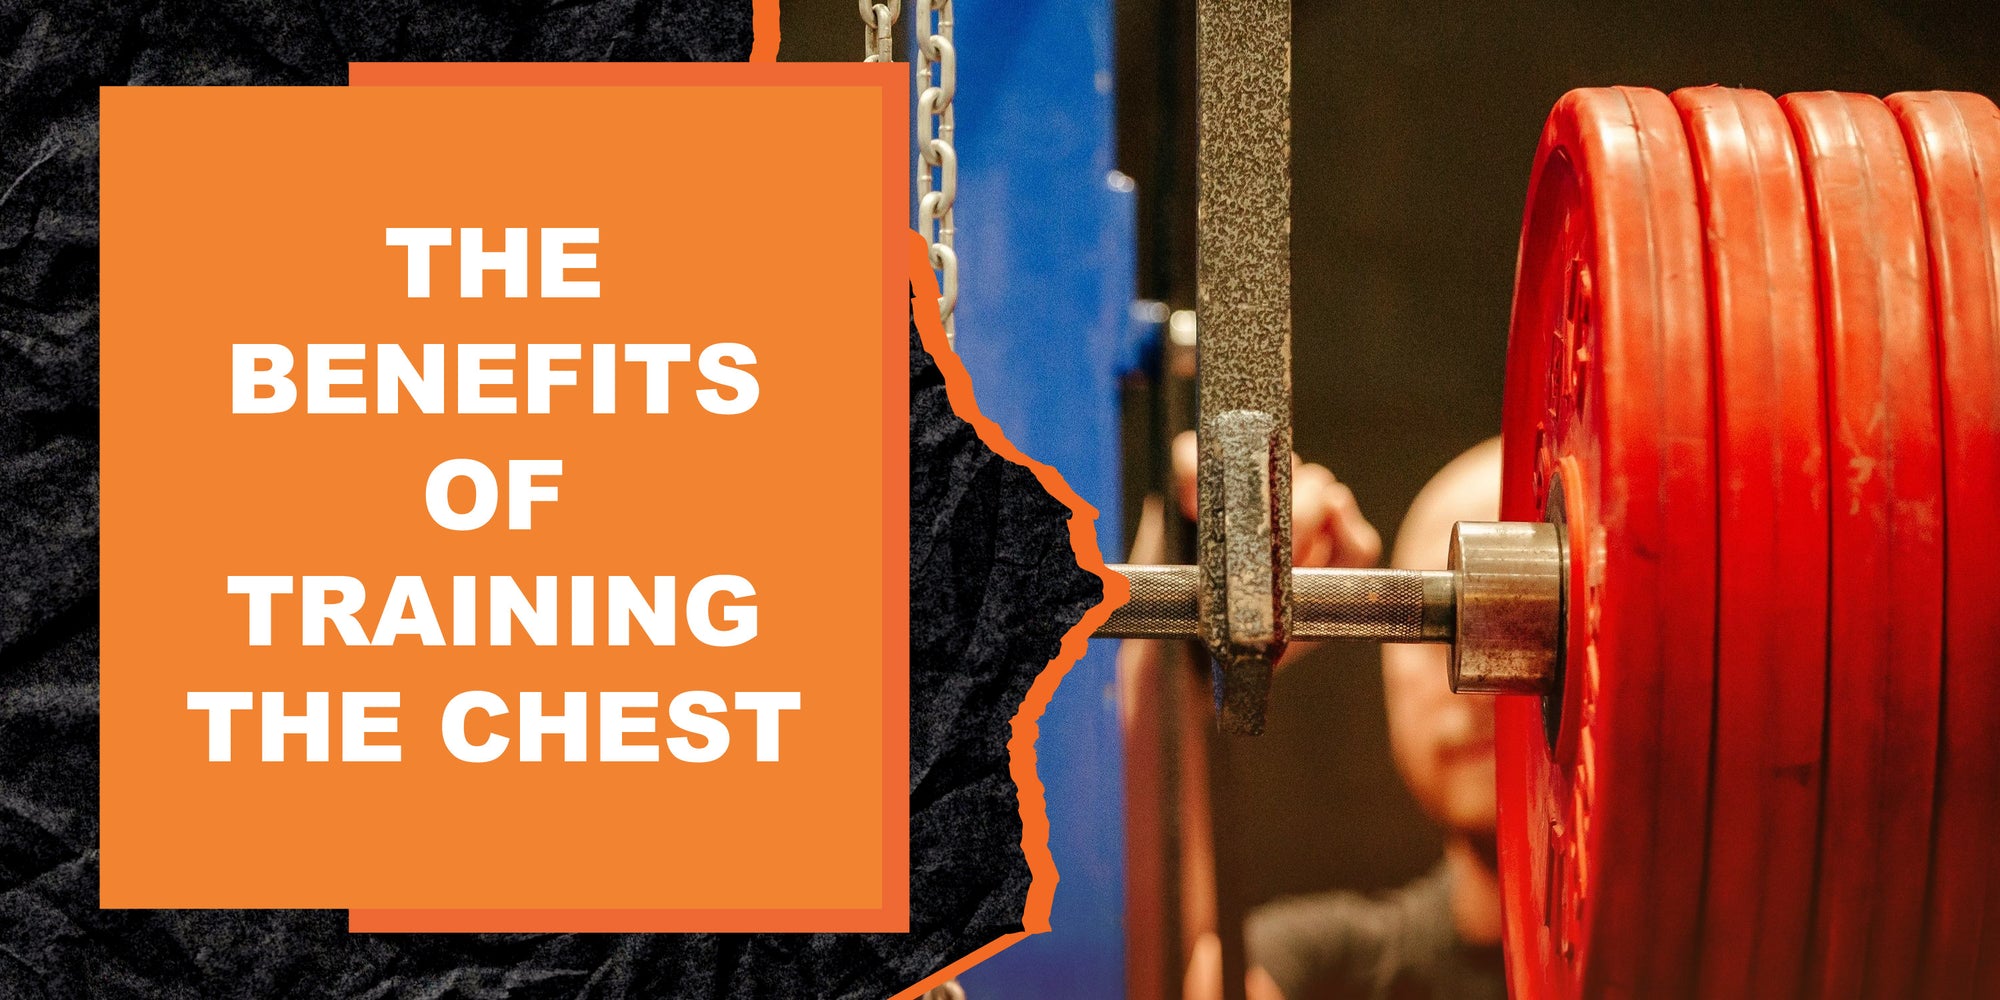 The Benefits of Training the Chest